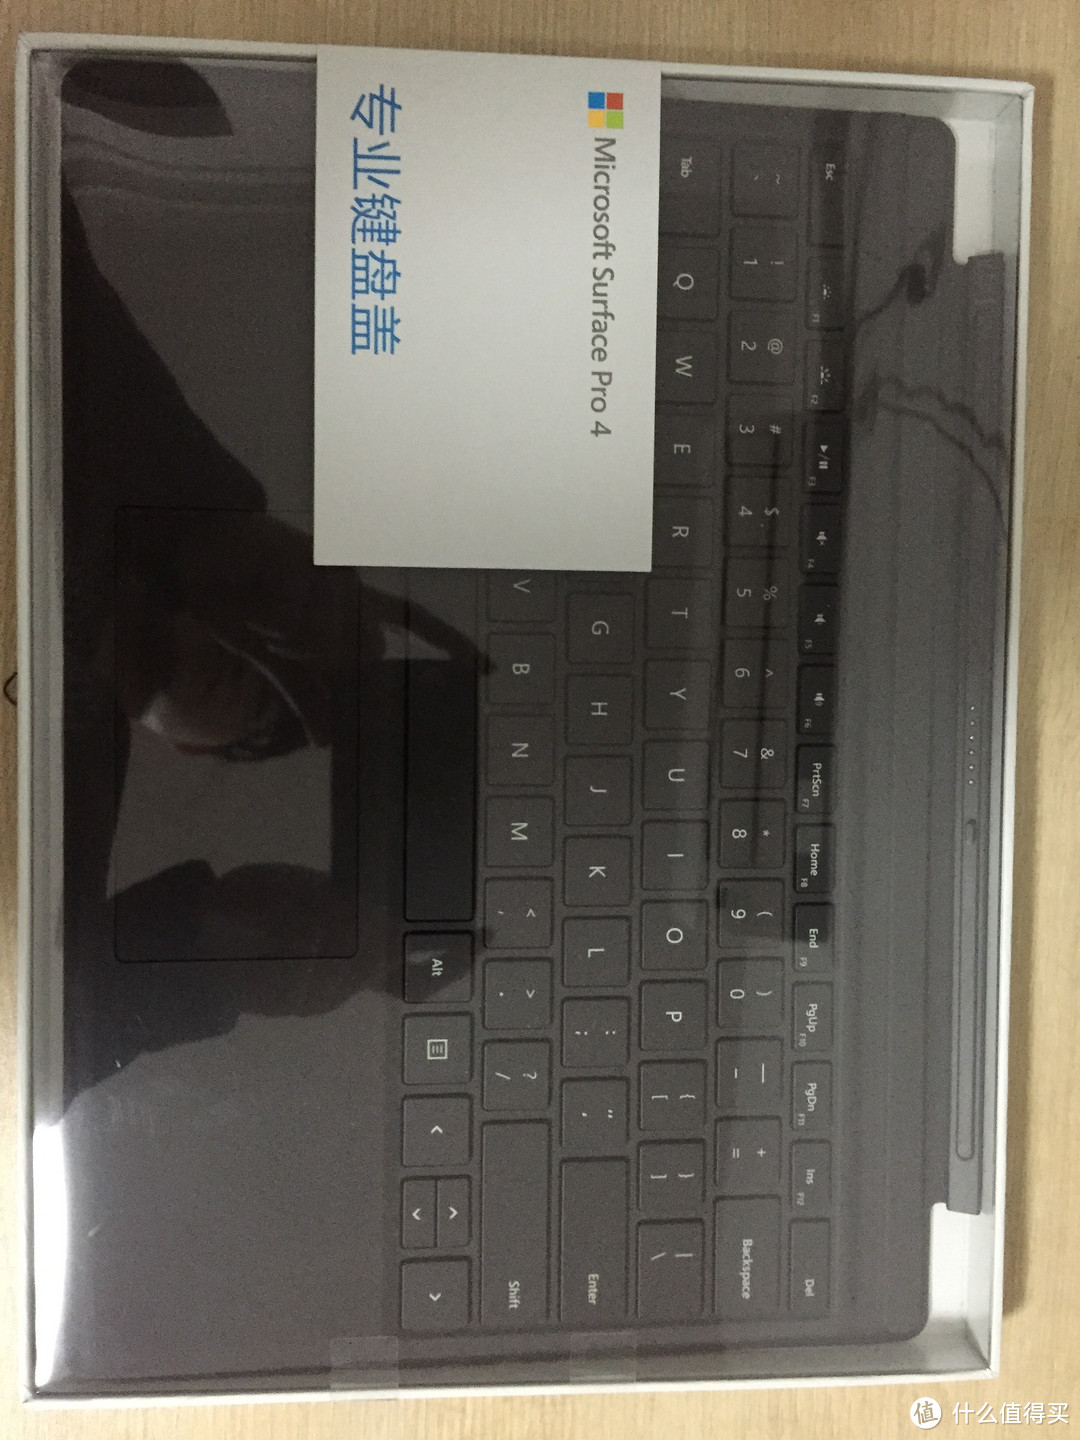 surface pro 提高生产力工具：Surface Pro 4 Type Cover